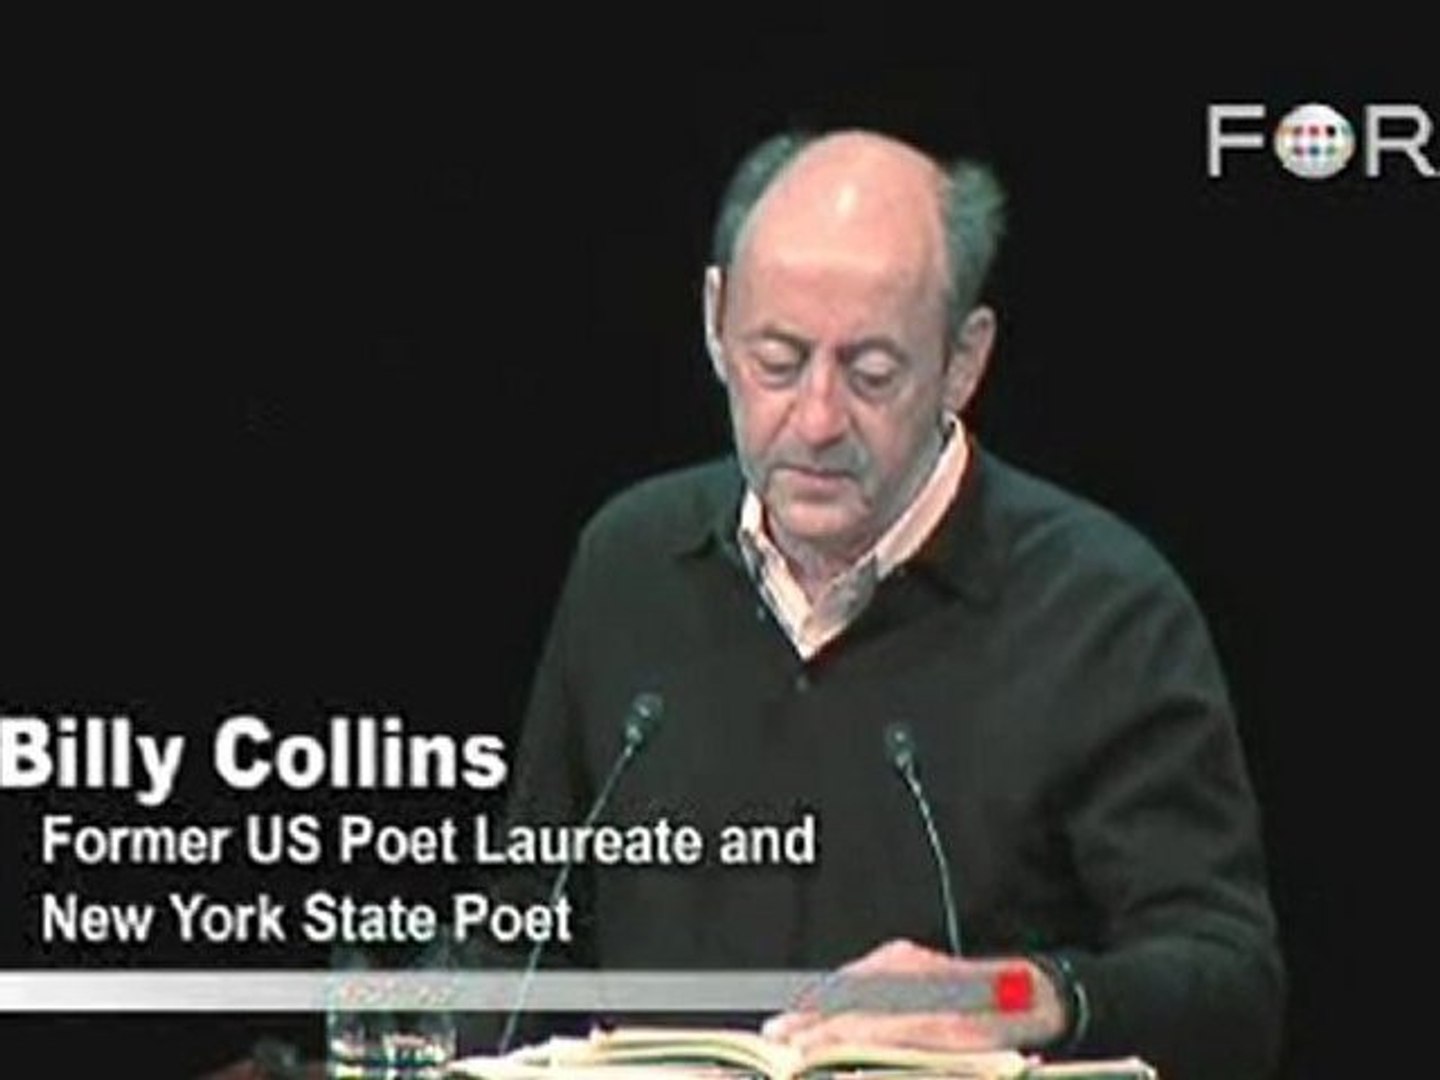 the lanyard billy collins